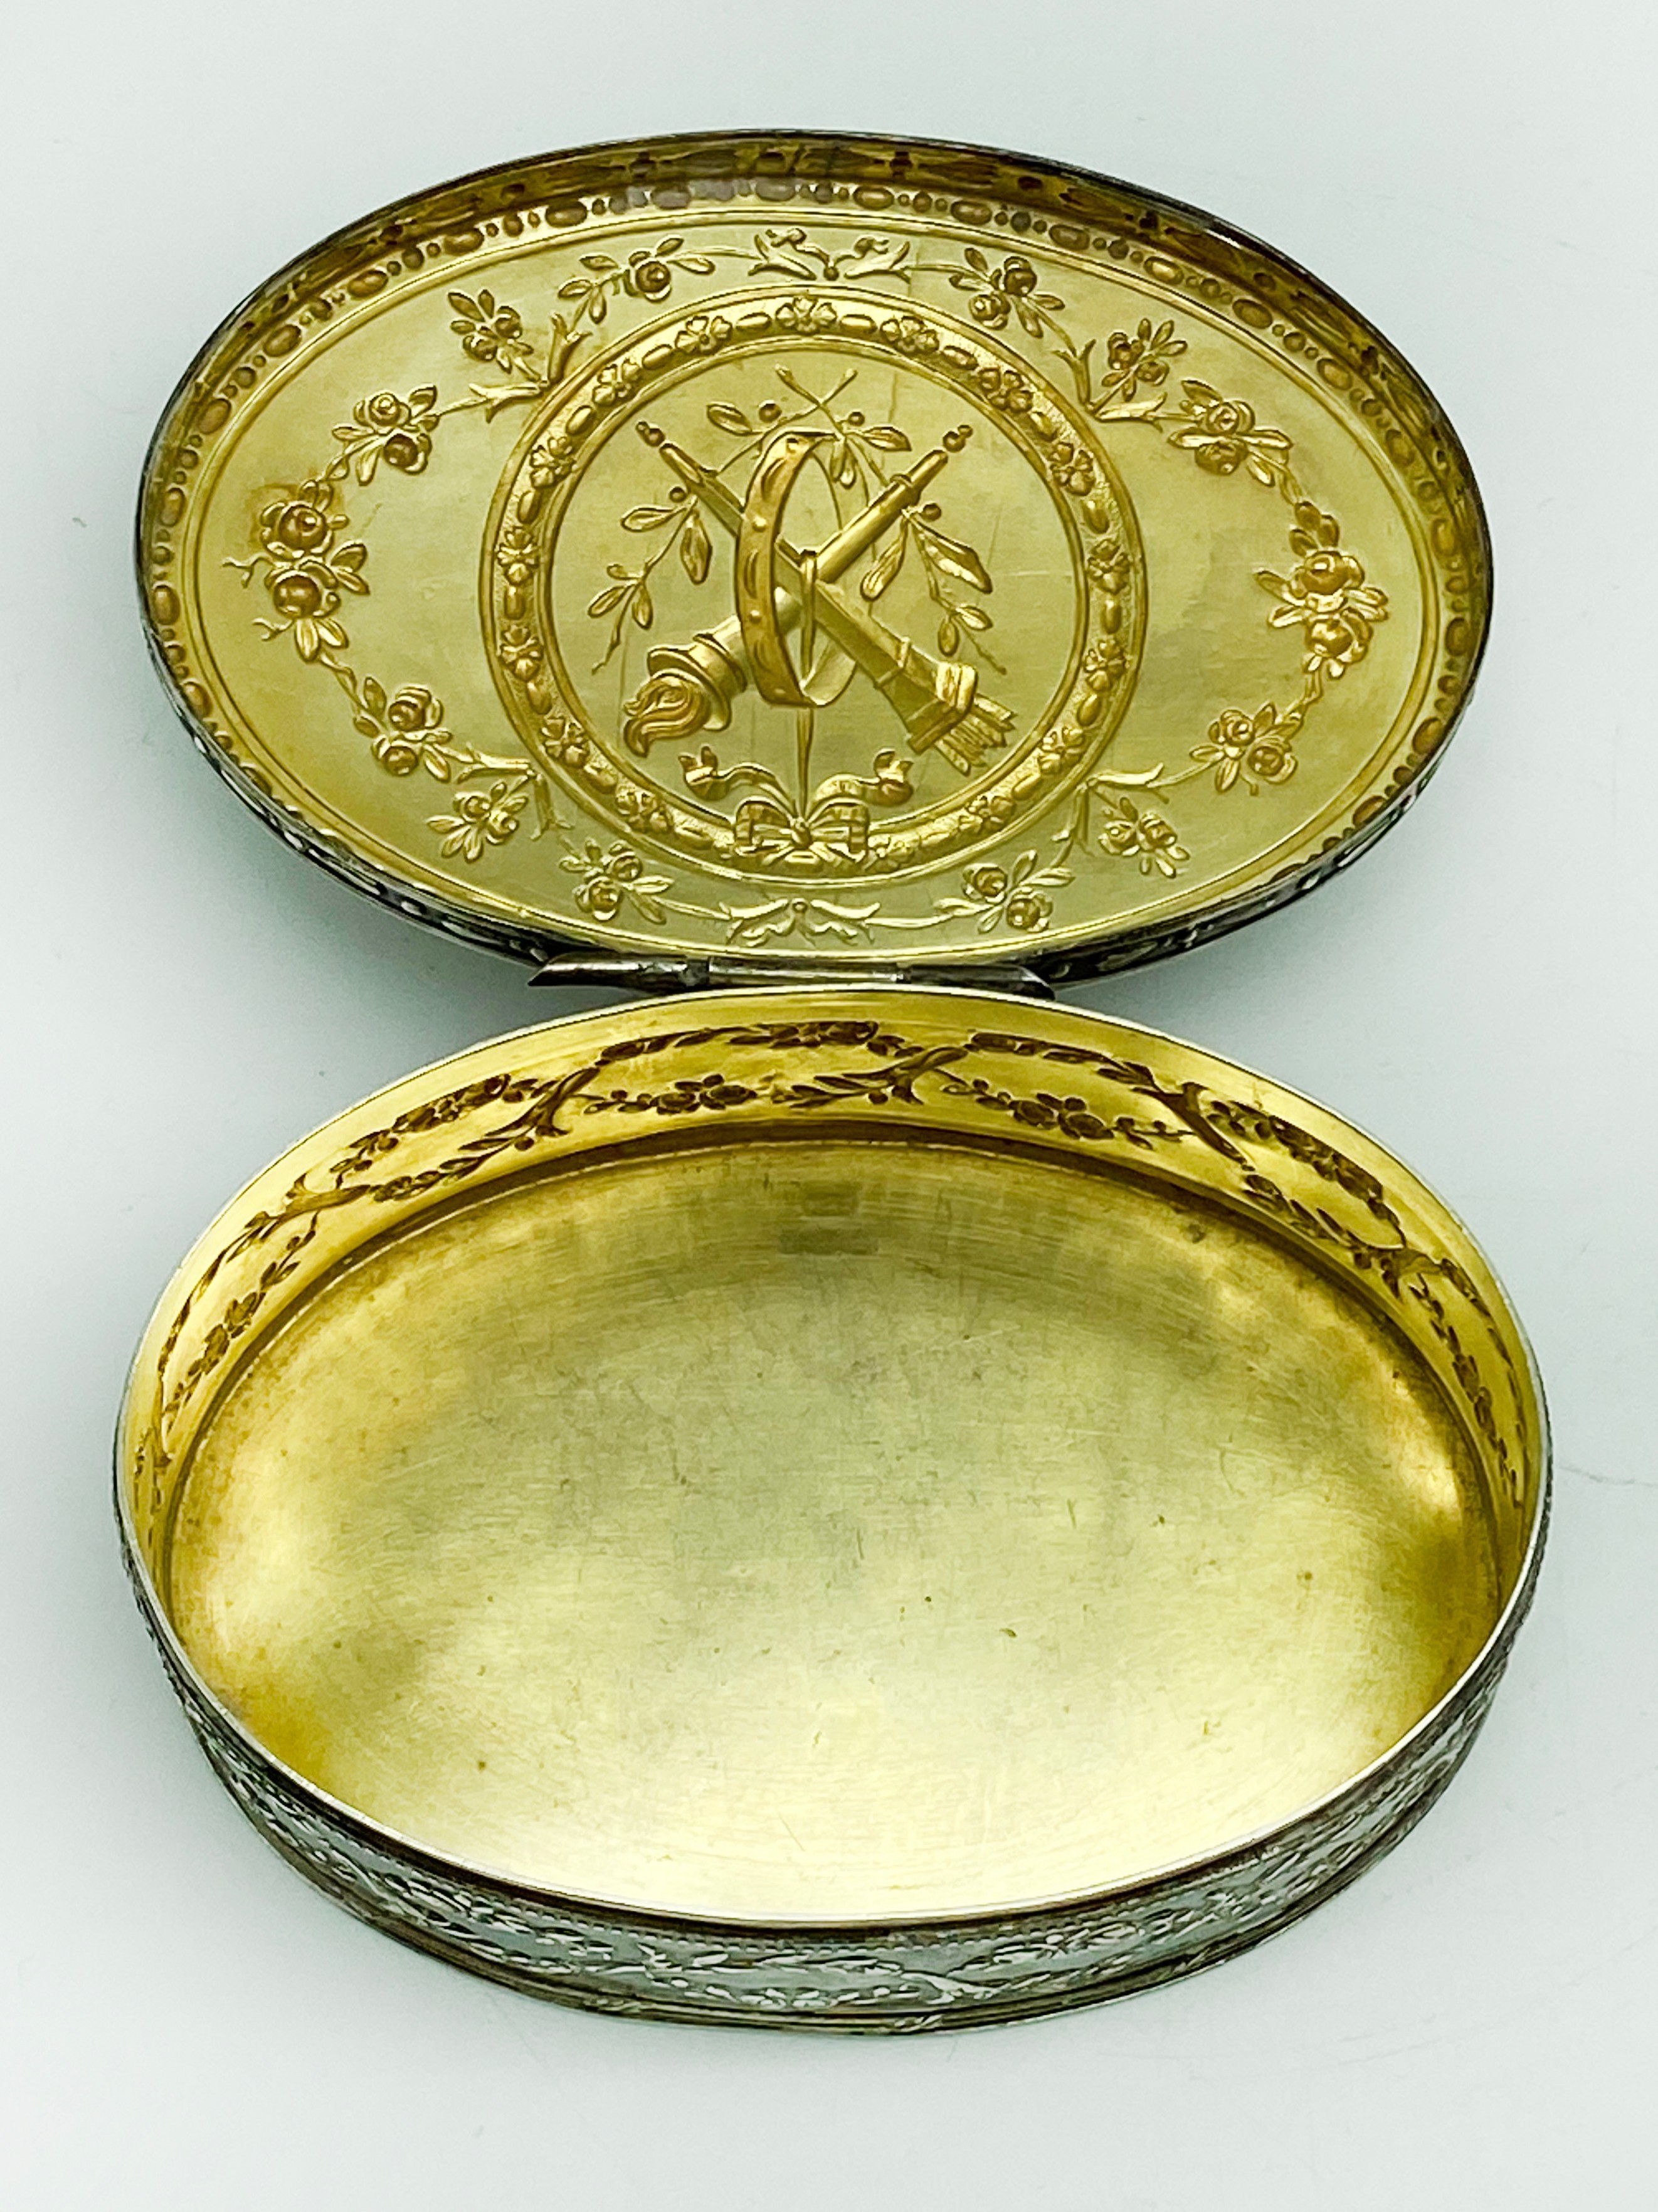 ANTIQUE HALLMARKED HANAU SILVER REPOUSSE TABLE SNUFF BOX IMPORTED HALLMARKED FOR BOAZ MOSES LANDECK - Image 5 of 7